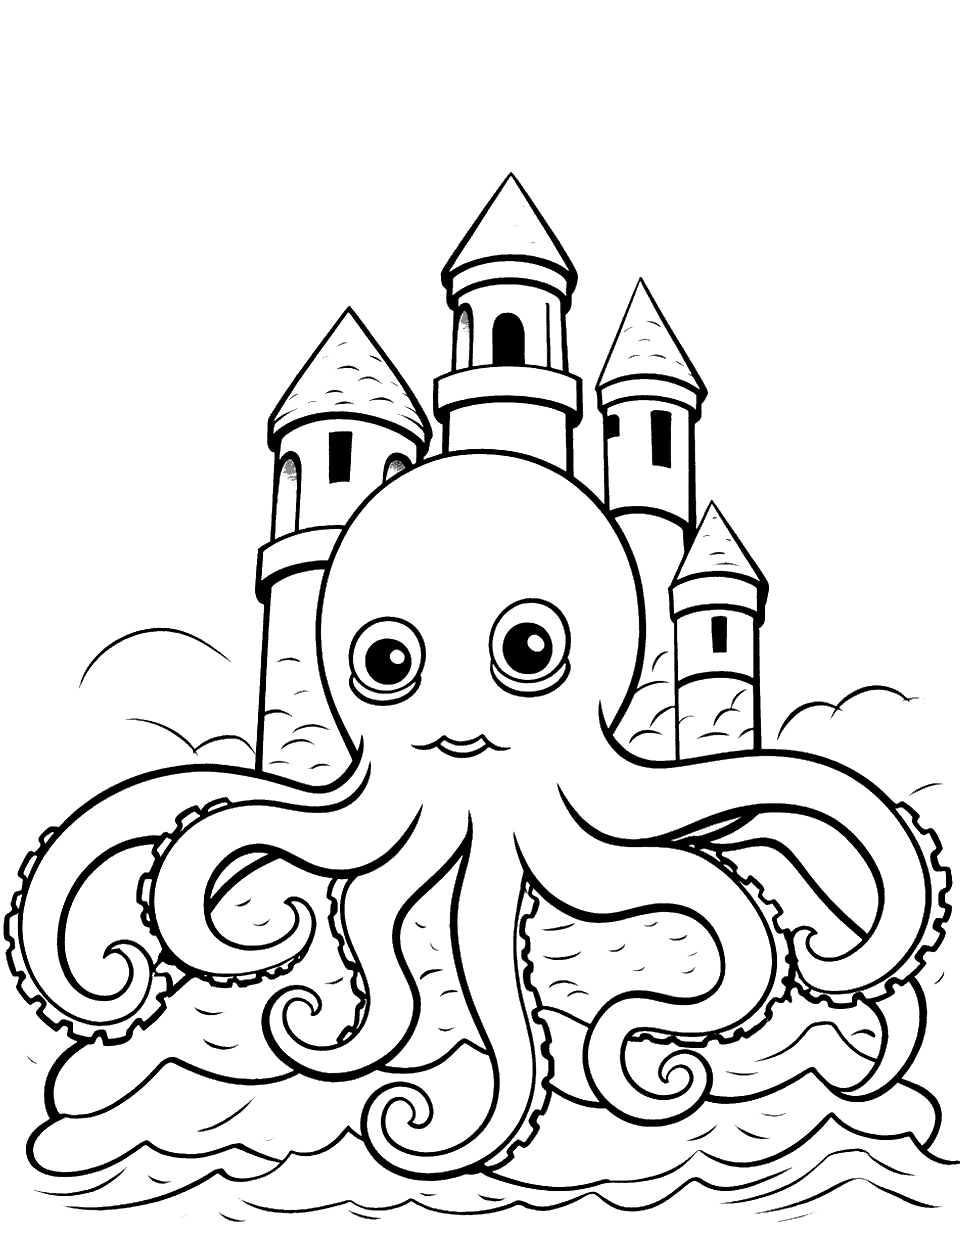 Octopus Building a Sandcastle Coloring Page - An octopus busy building a detailed sandcastle on the beach.